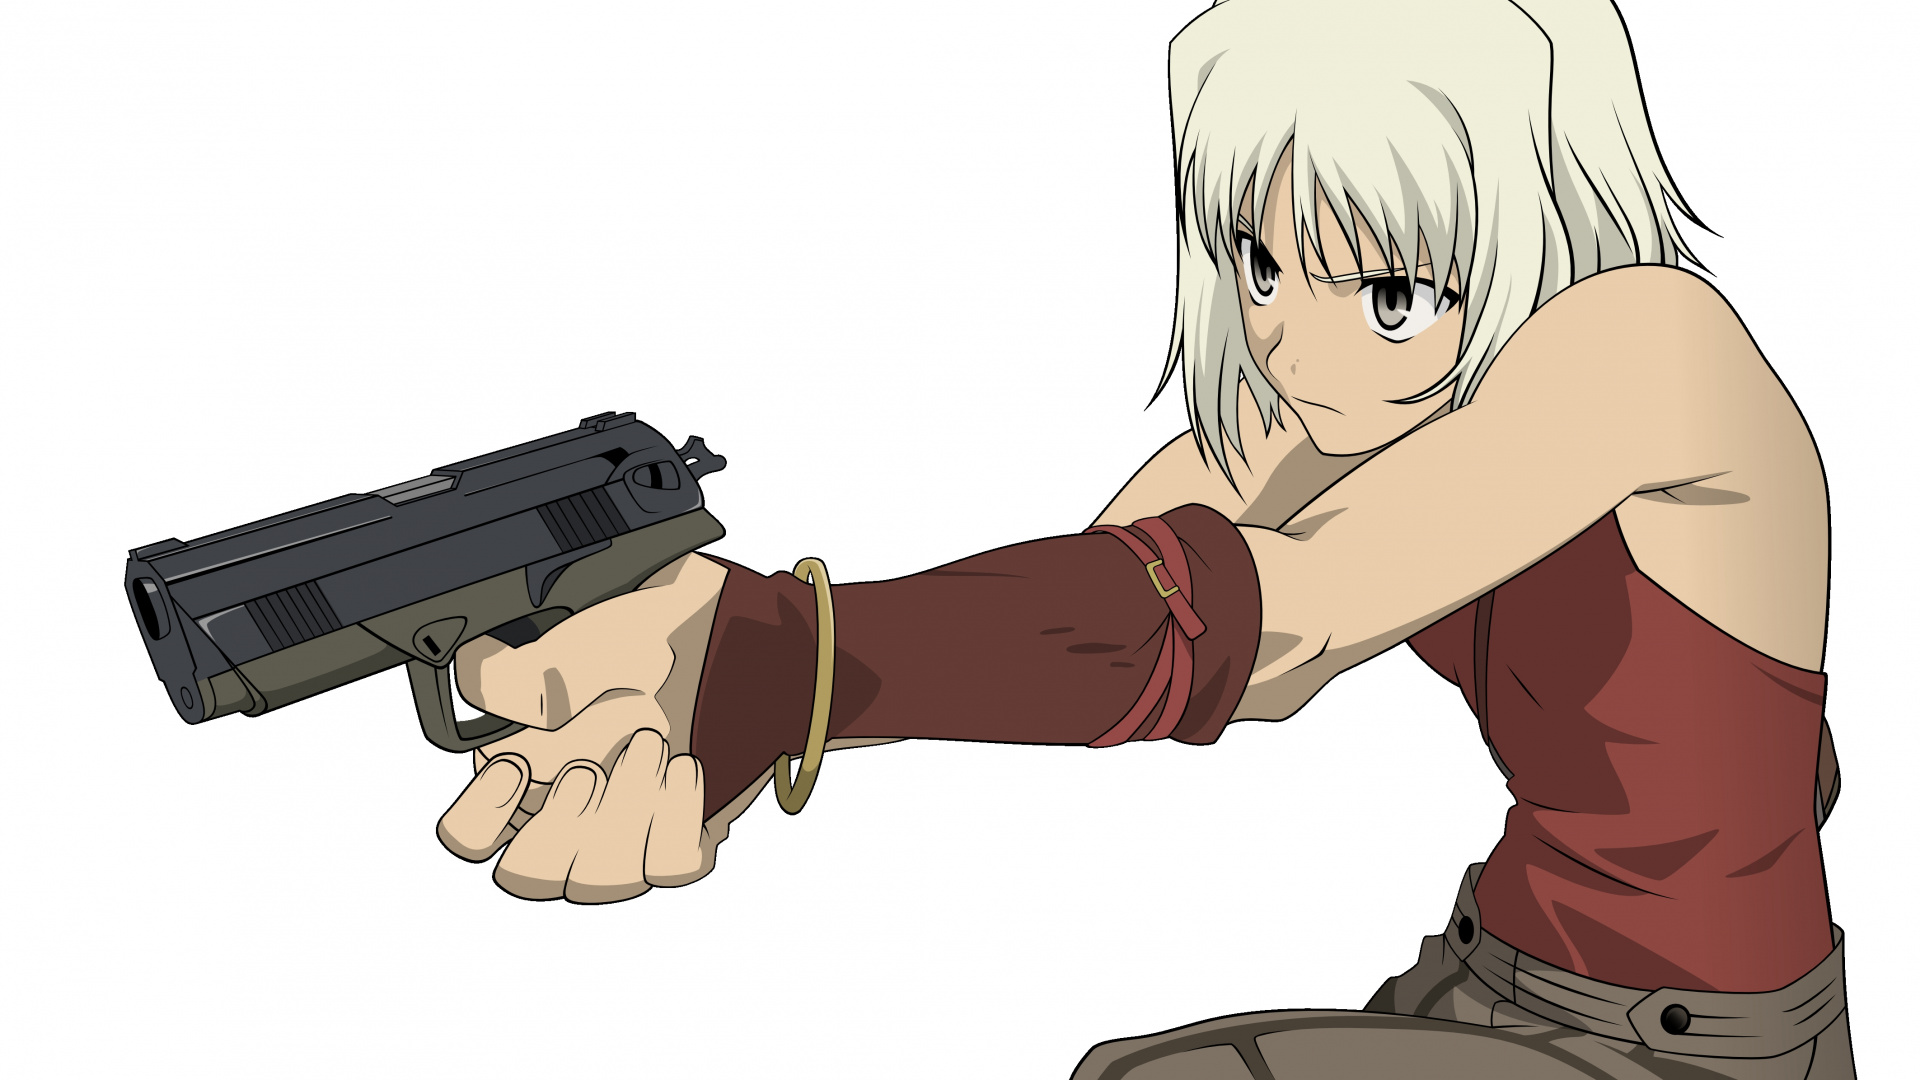 Blonde Haired Male Anime Character Holding Black Semi Automatic Pistol. Wallpaper in 1920x1080 Resolution